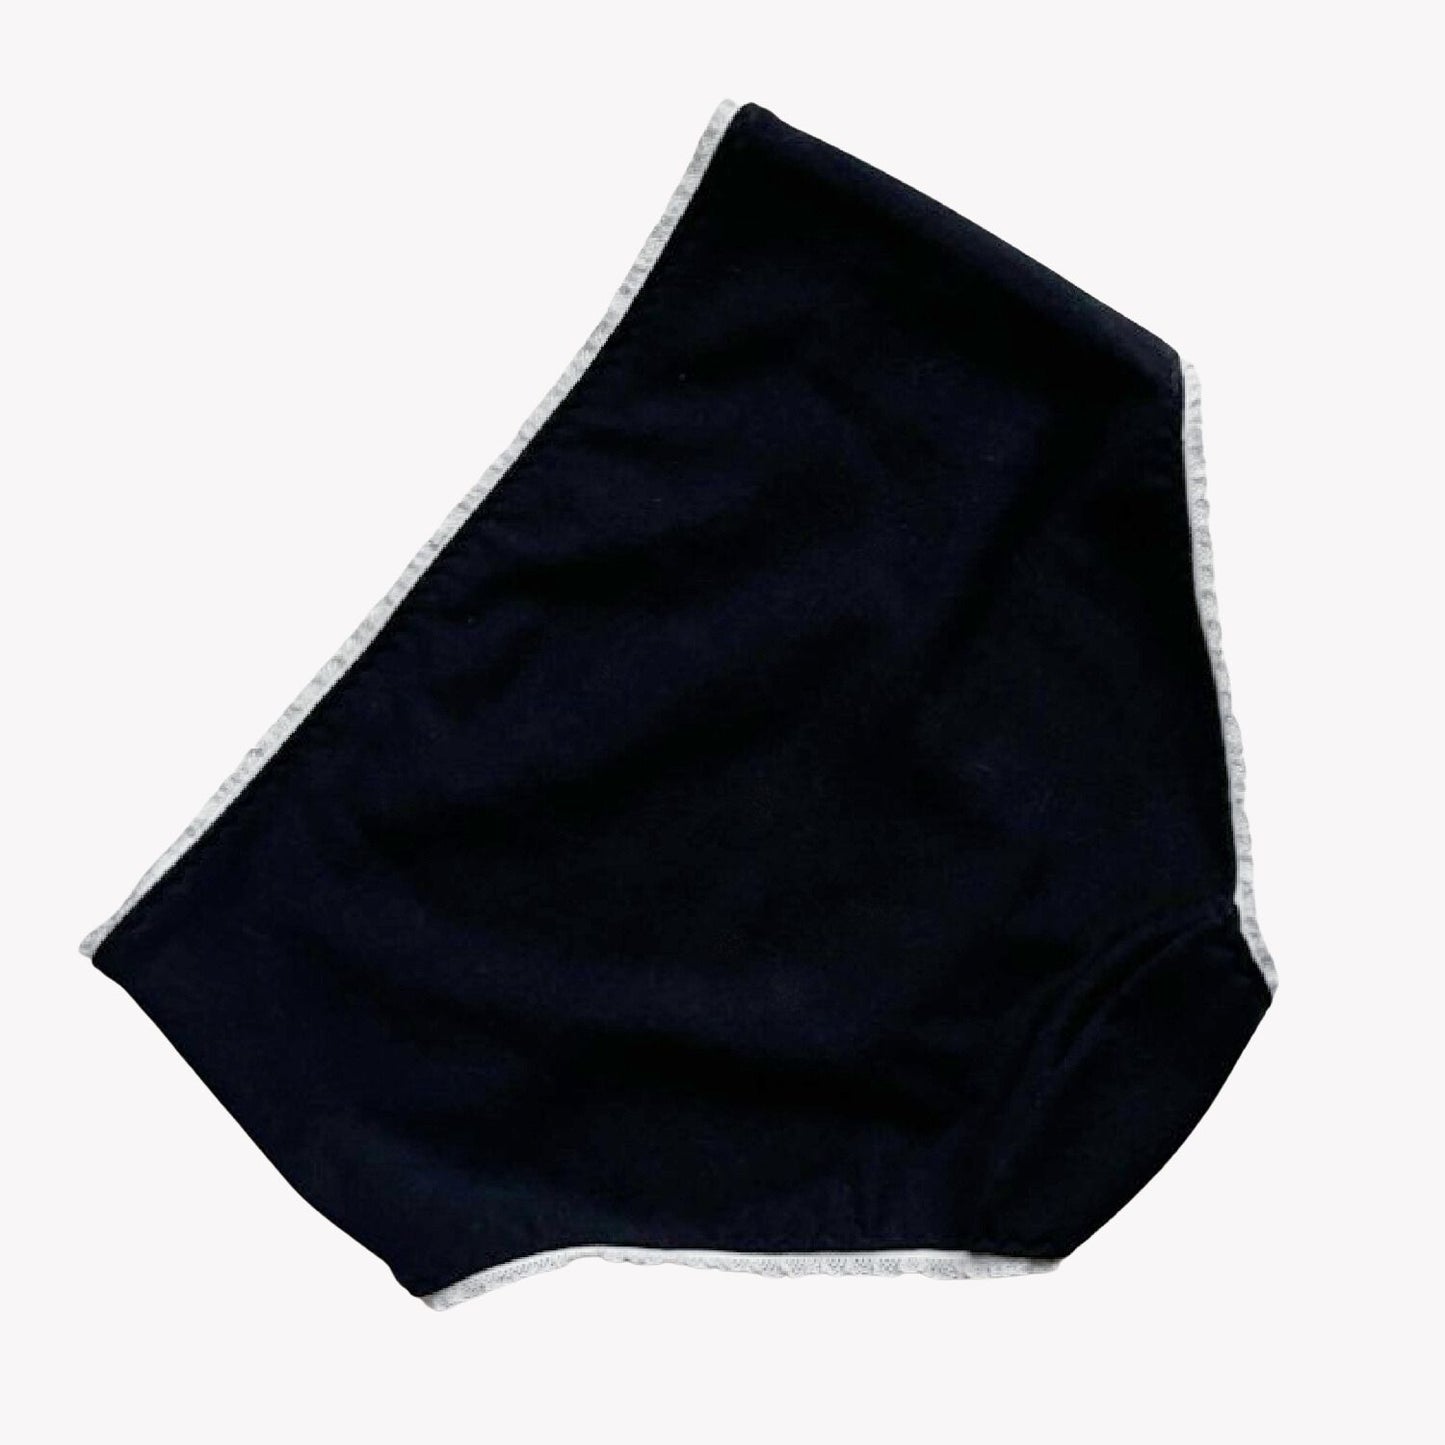 Merino wool hipster brief | Made to measure lingerie